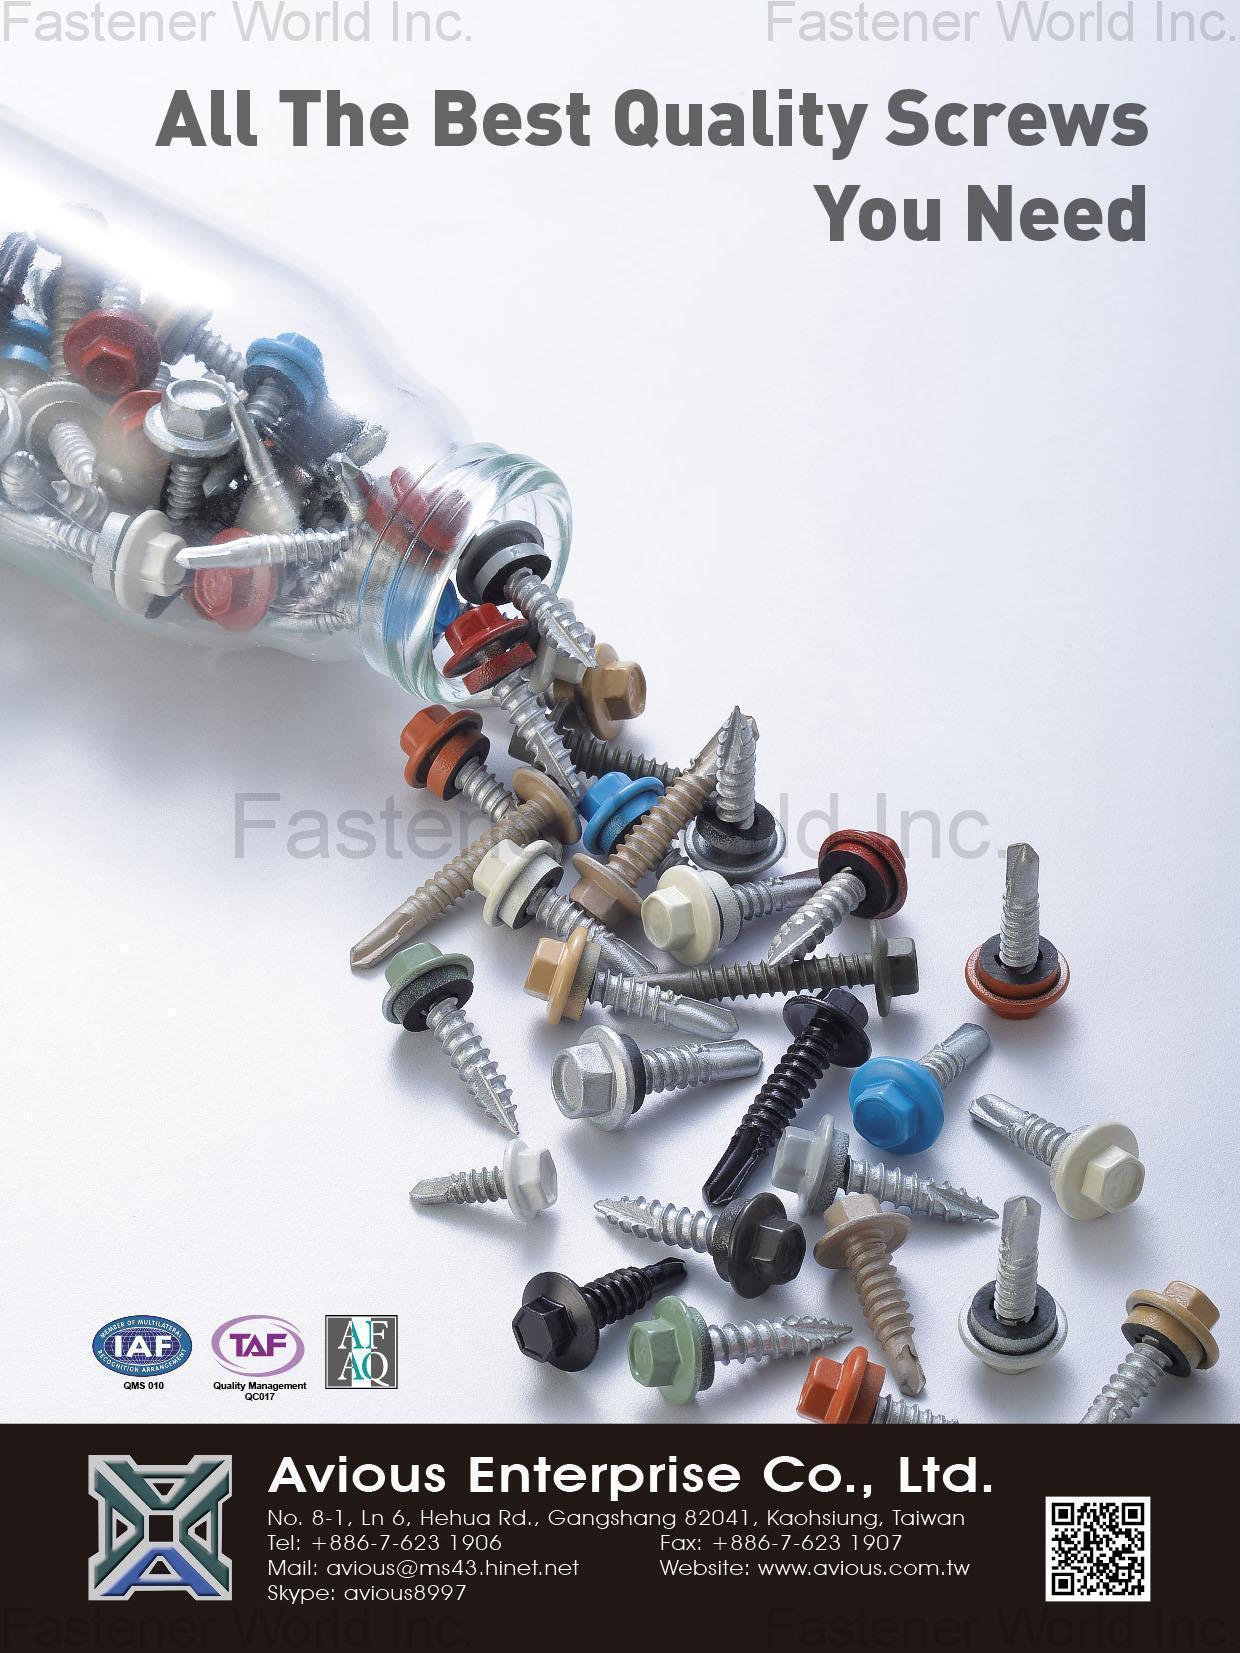 Seat Bolts,Stud Bolts,Machine Screws,SEMS Screws,Self-Tapping Screws,Self-drilling Screws,Thread Cutting Screws,Collated Screws,Special Screws,Wheel Nuts,Special Nuts,Washers